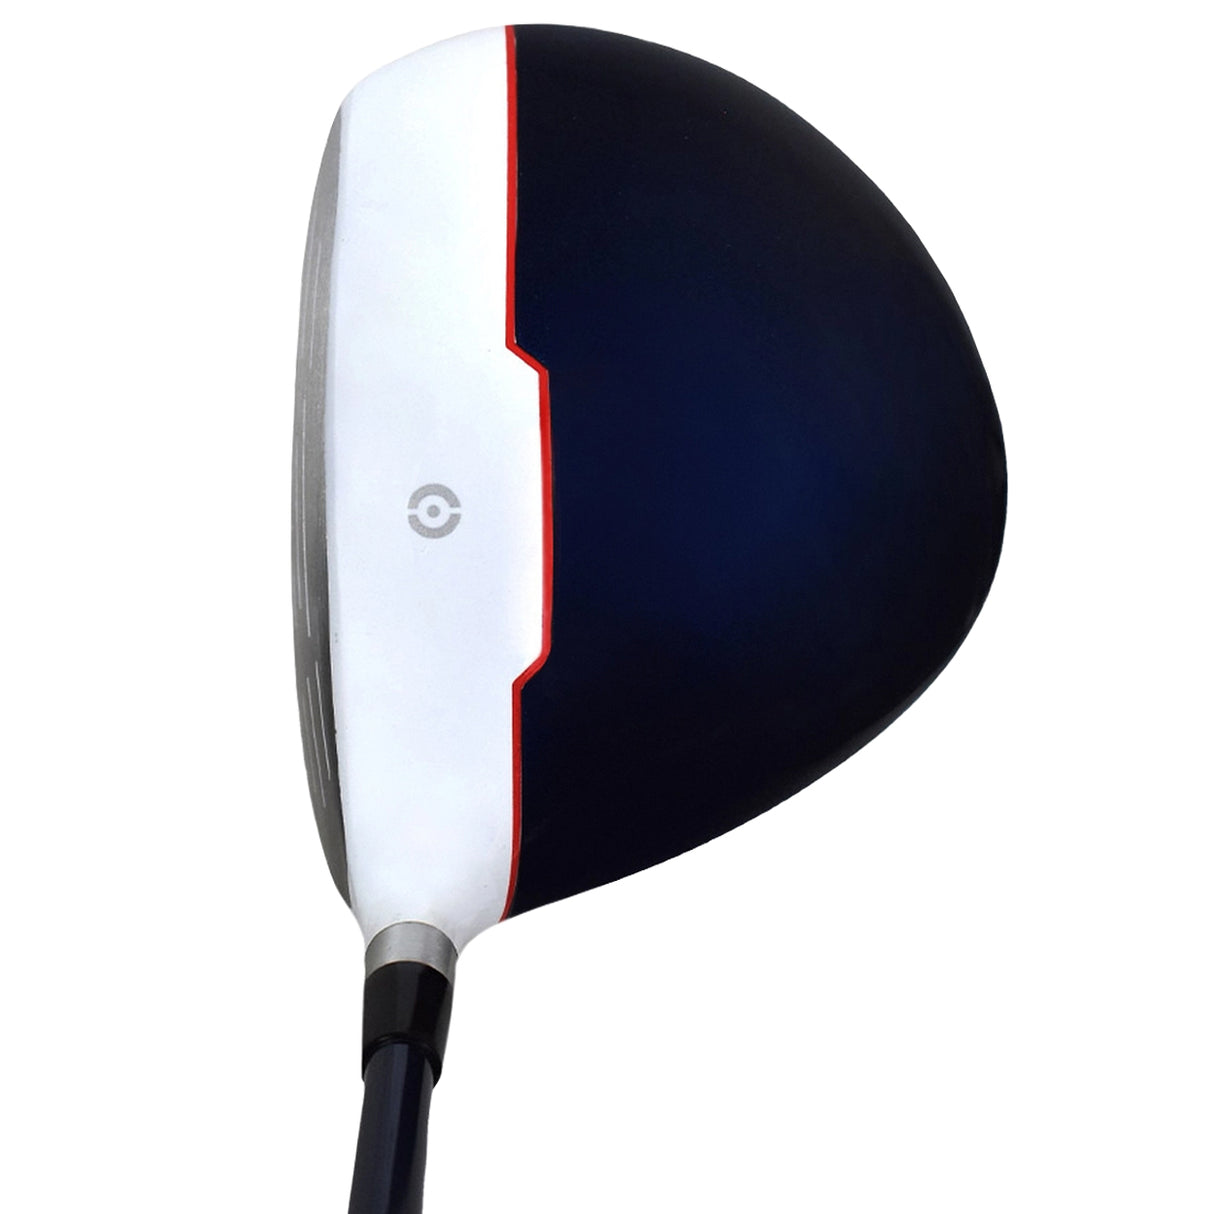 Bullet Golf Limited Edition USA B-52 Bomber Driver